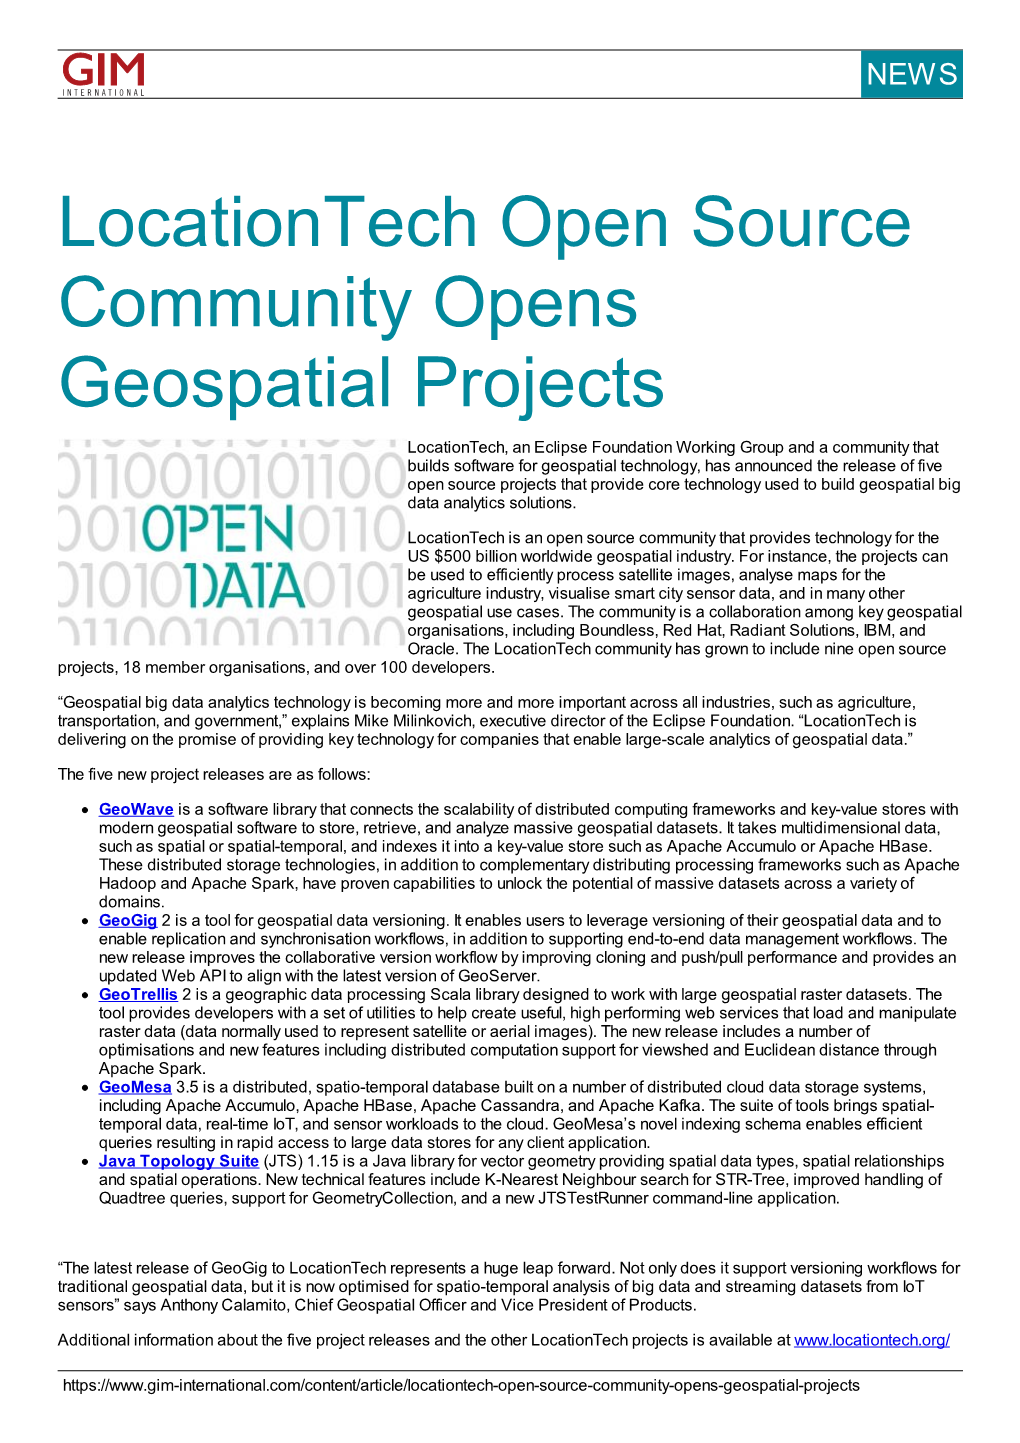 Locationtech Open Source Community Opens Geospatial Projects